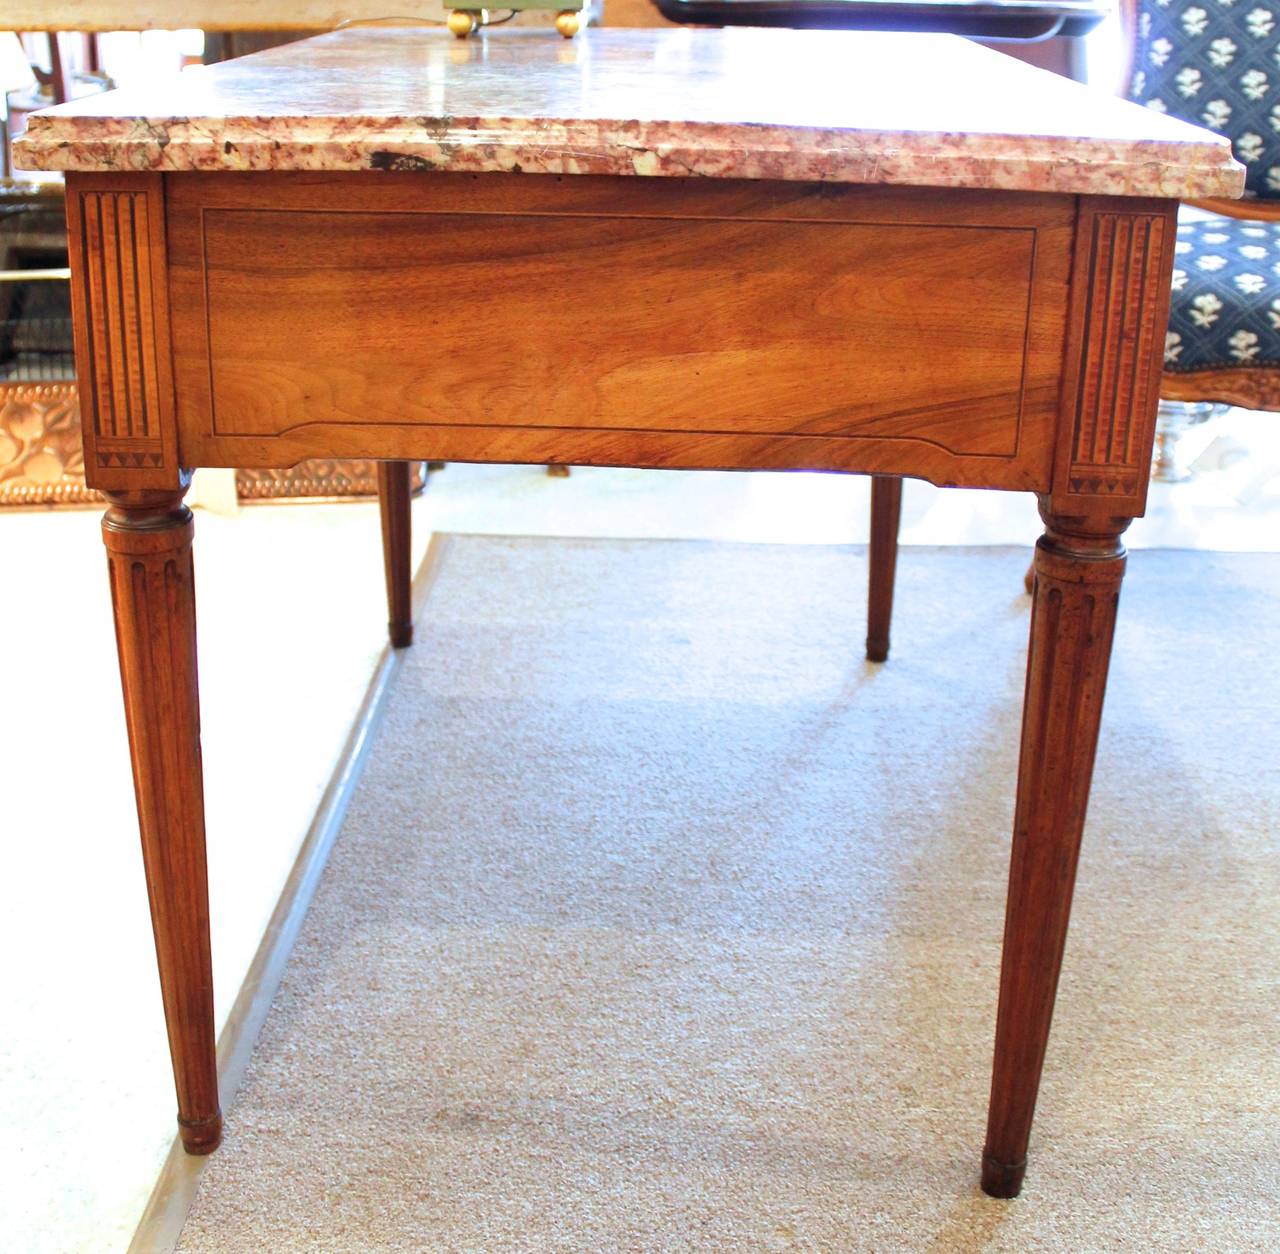 18th Century Italian Neoclassical Inlaid Console or Center Table with Marble Top